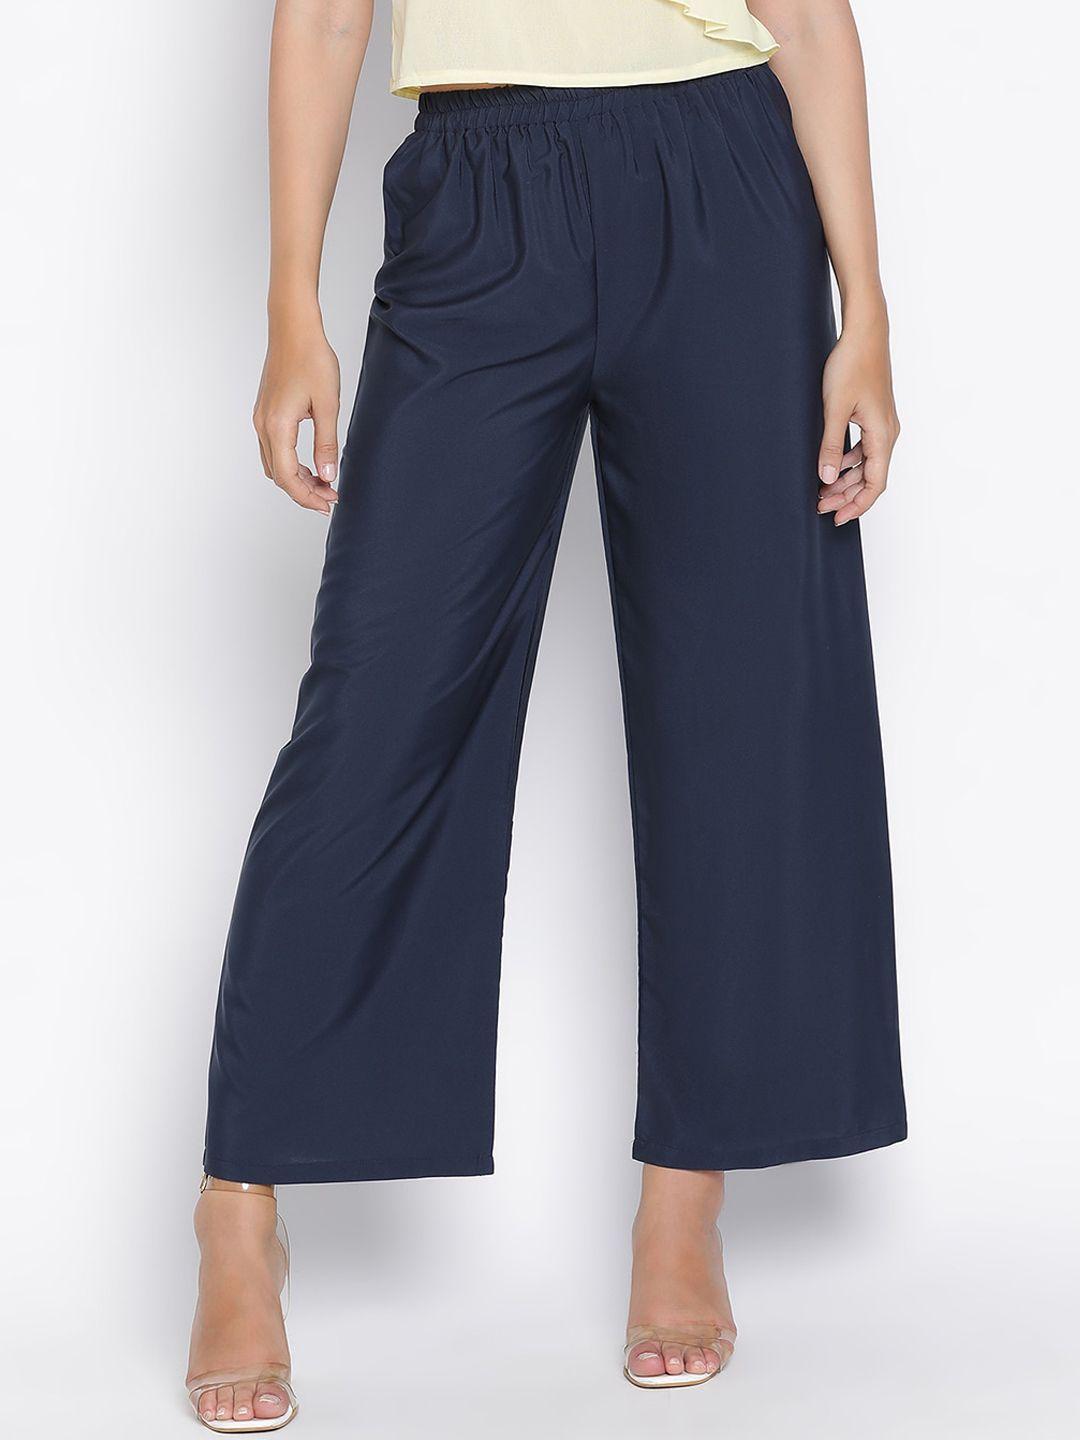 draax-fashions-women-relaxed-flared-trousers